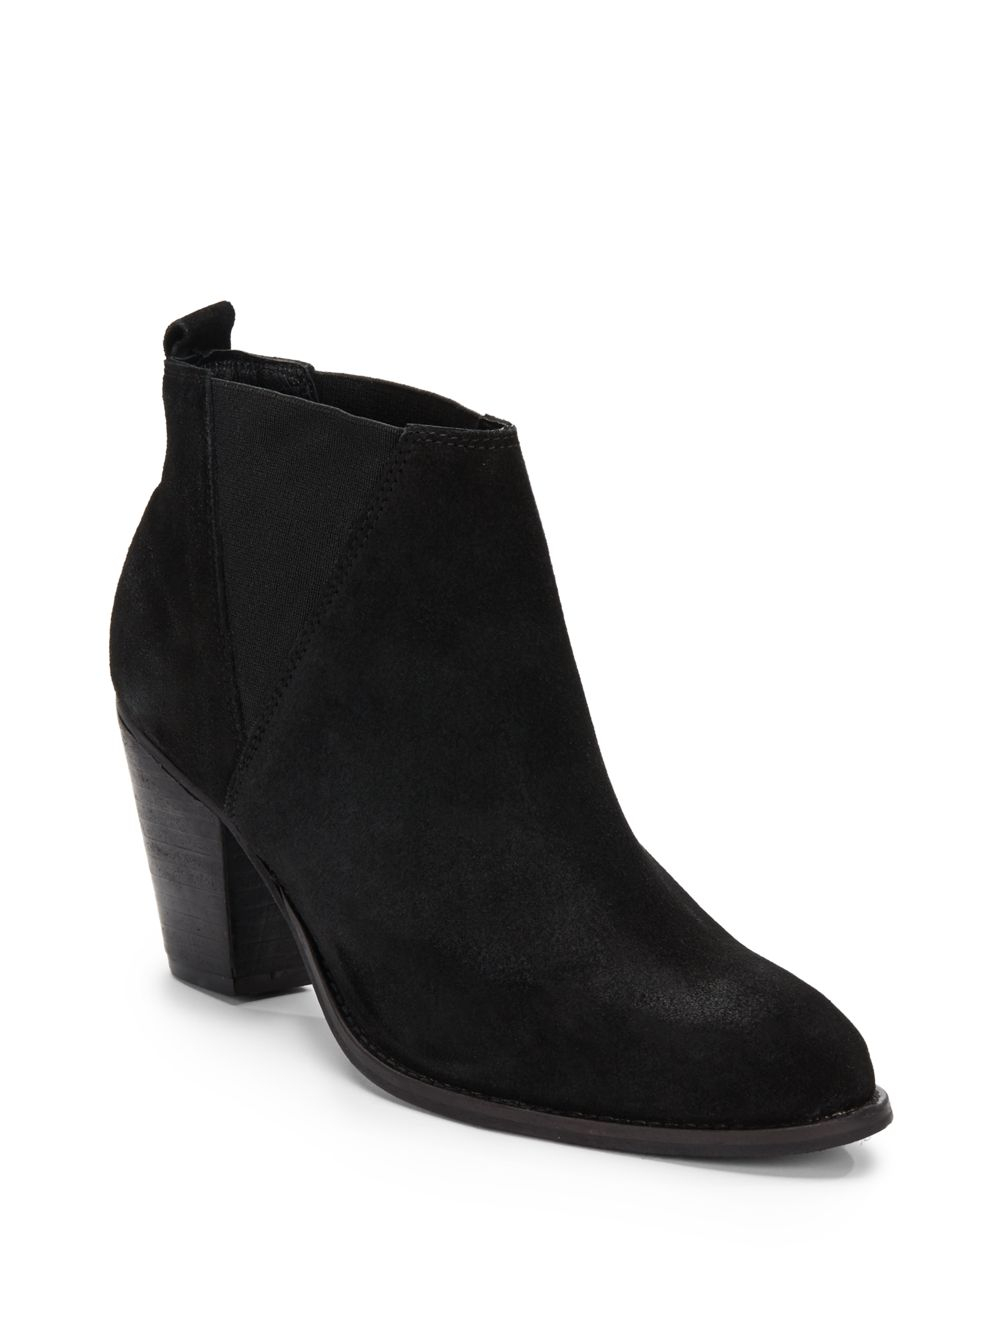 CHARLES DAVID VAXIO BLACK SUEDE STRETCH GORE ANKLE BOOTIE WITH STACKED HEEL